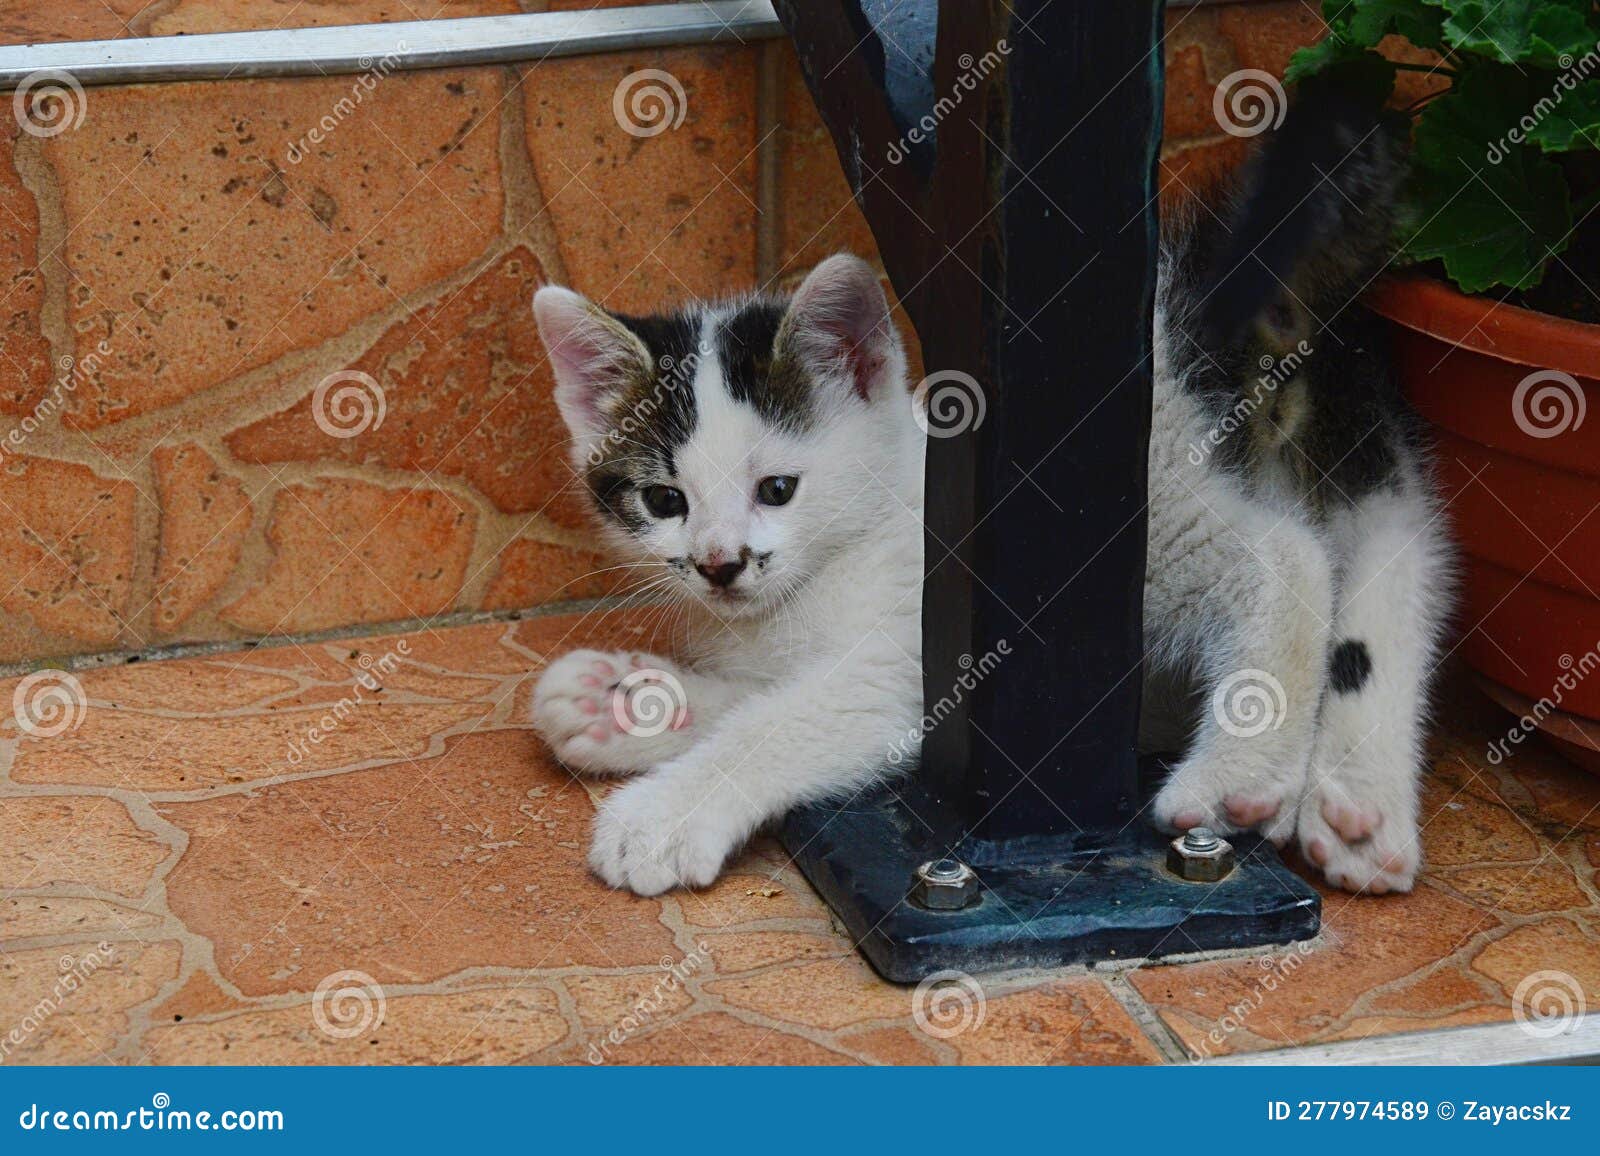 cute bicolor male kitten with nice moustache like color patch around the nose